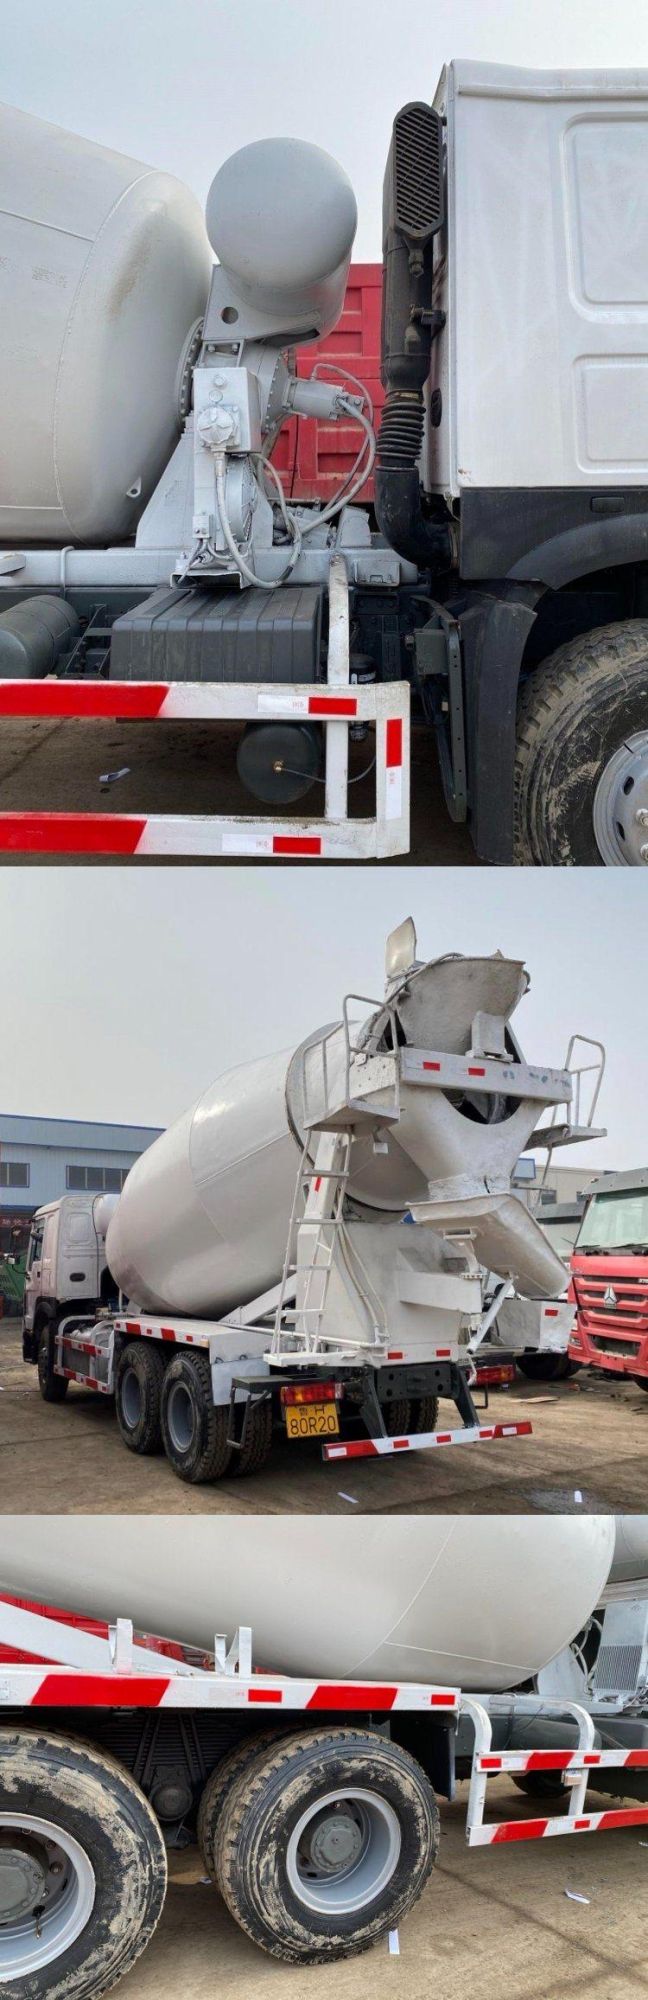 Good Condition Used China Sinotruk HOWO 6X4 12cbm LHD Concrete Mixer Truck for Sale